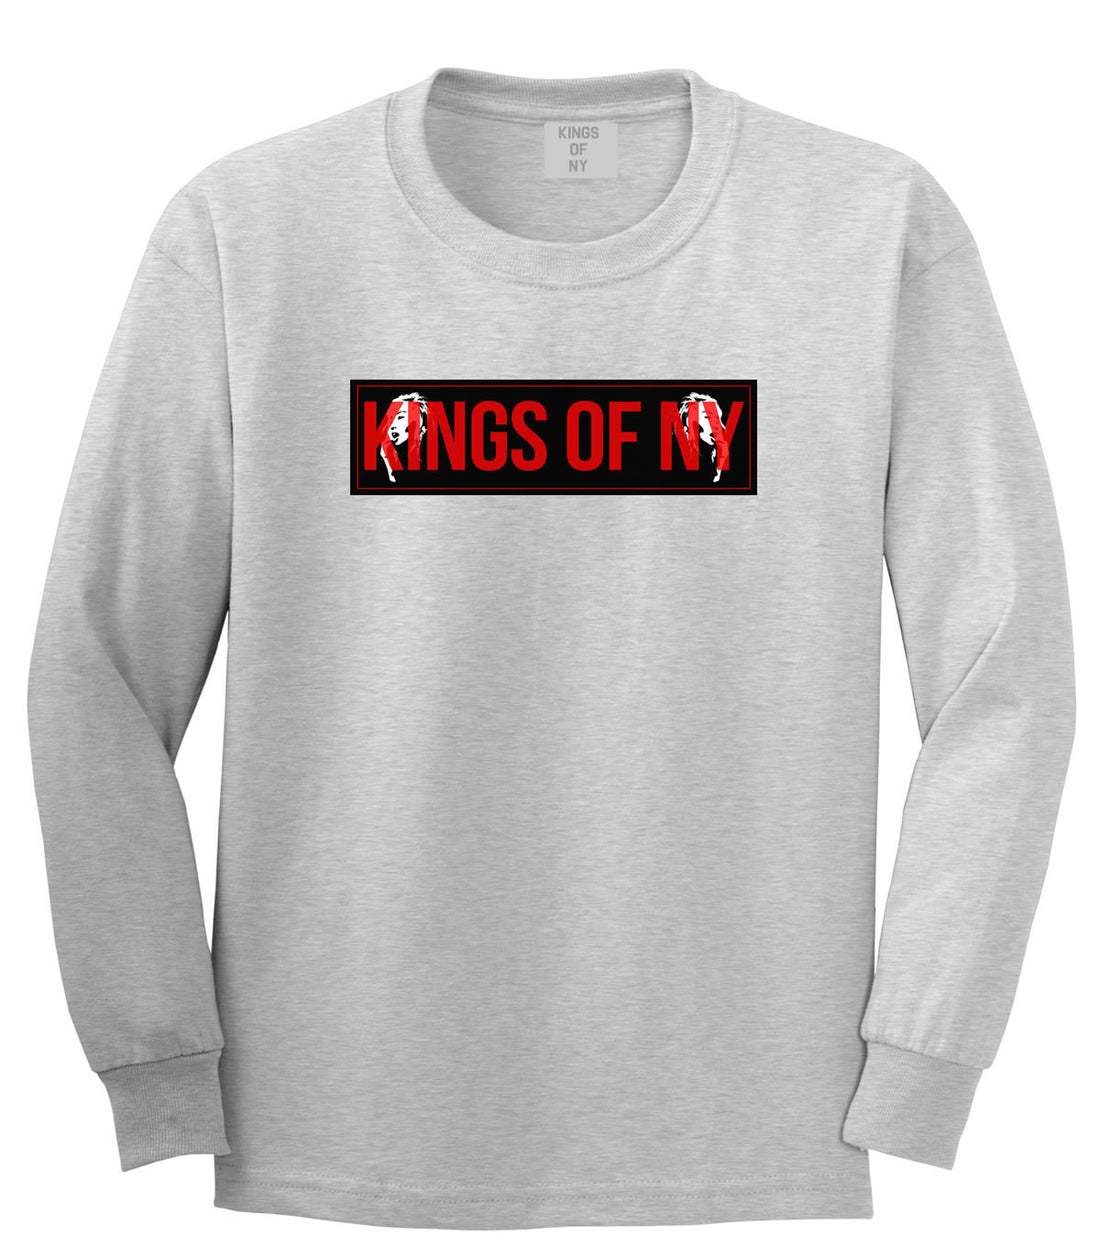 Red Girl Logo Print Long Sleeve T-Shirt in Grey by Kings Of NY